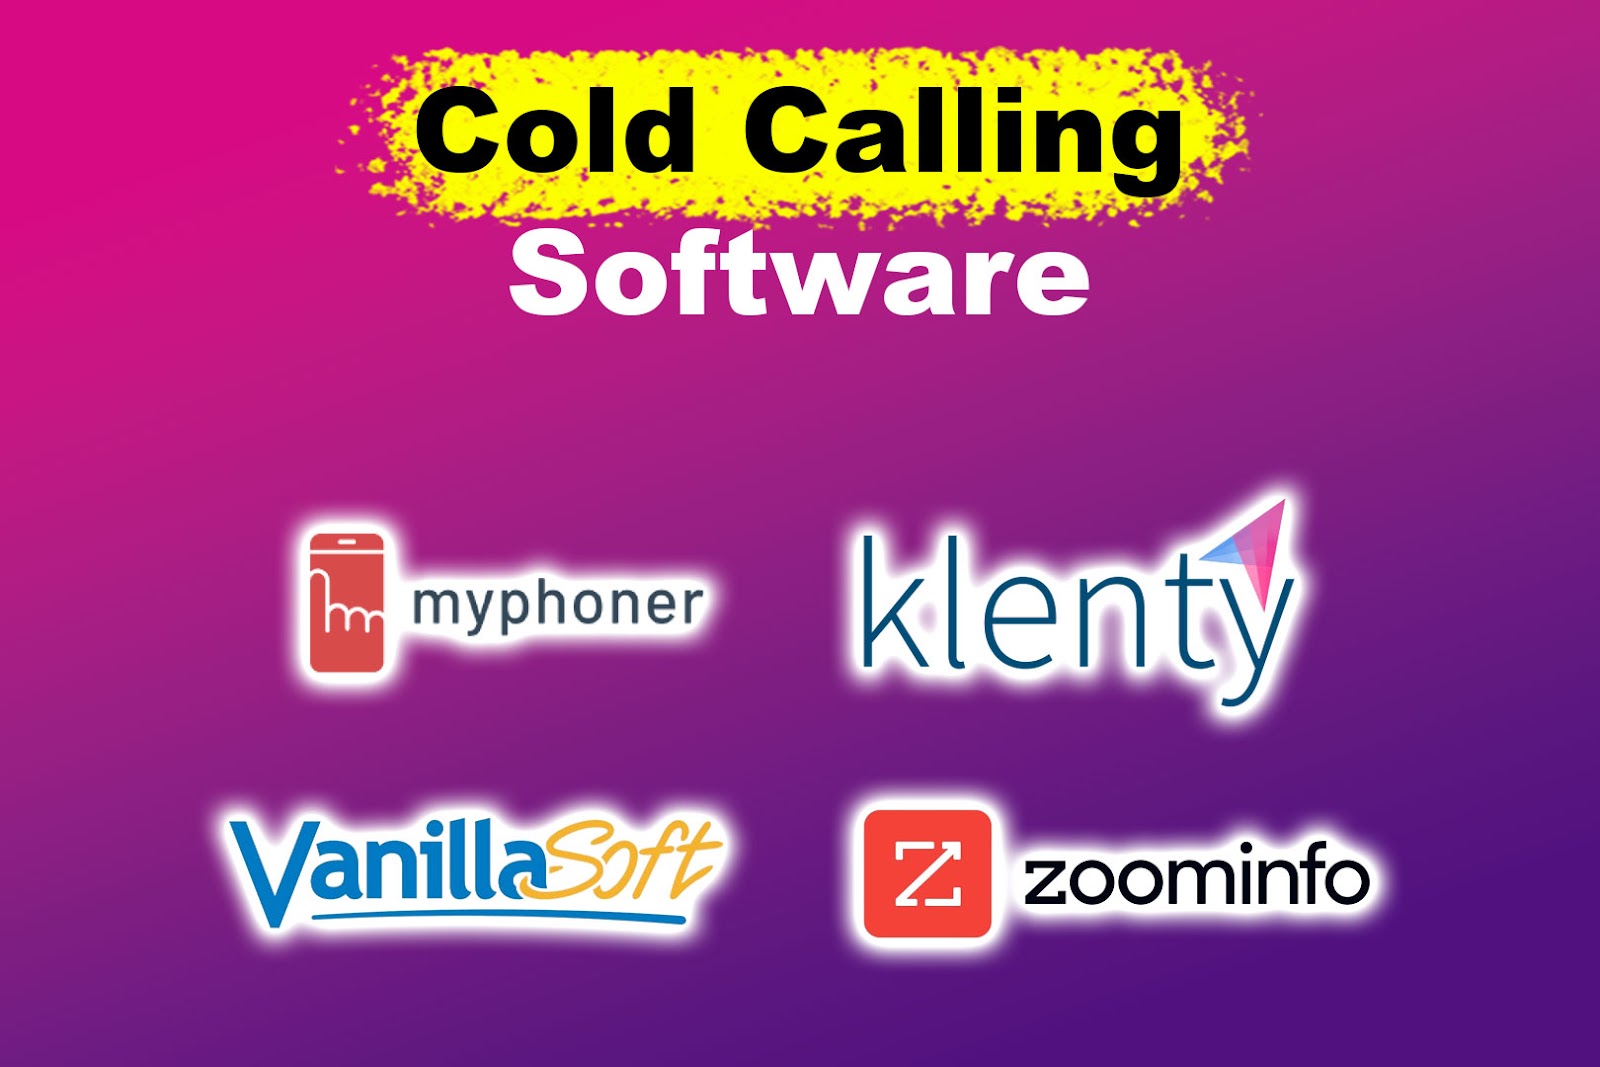 Cold-Calling Software